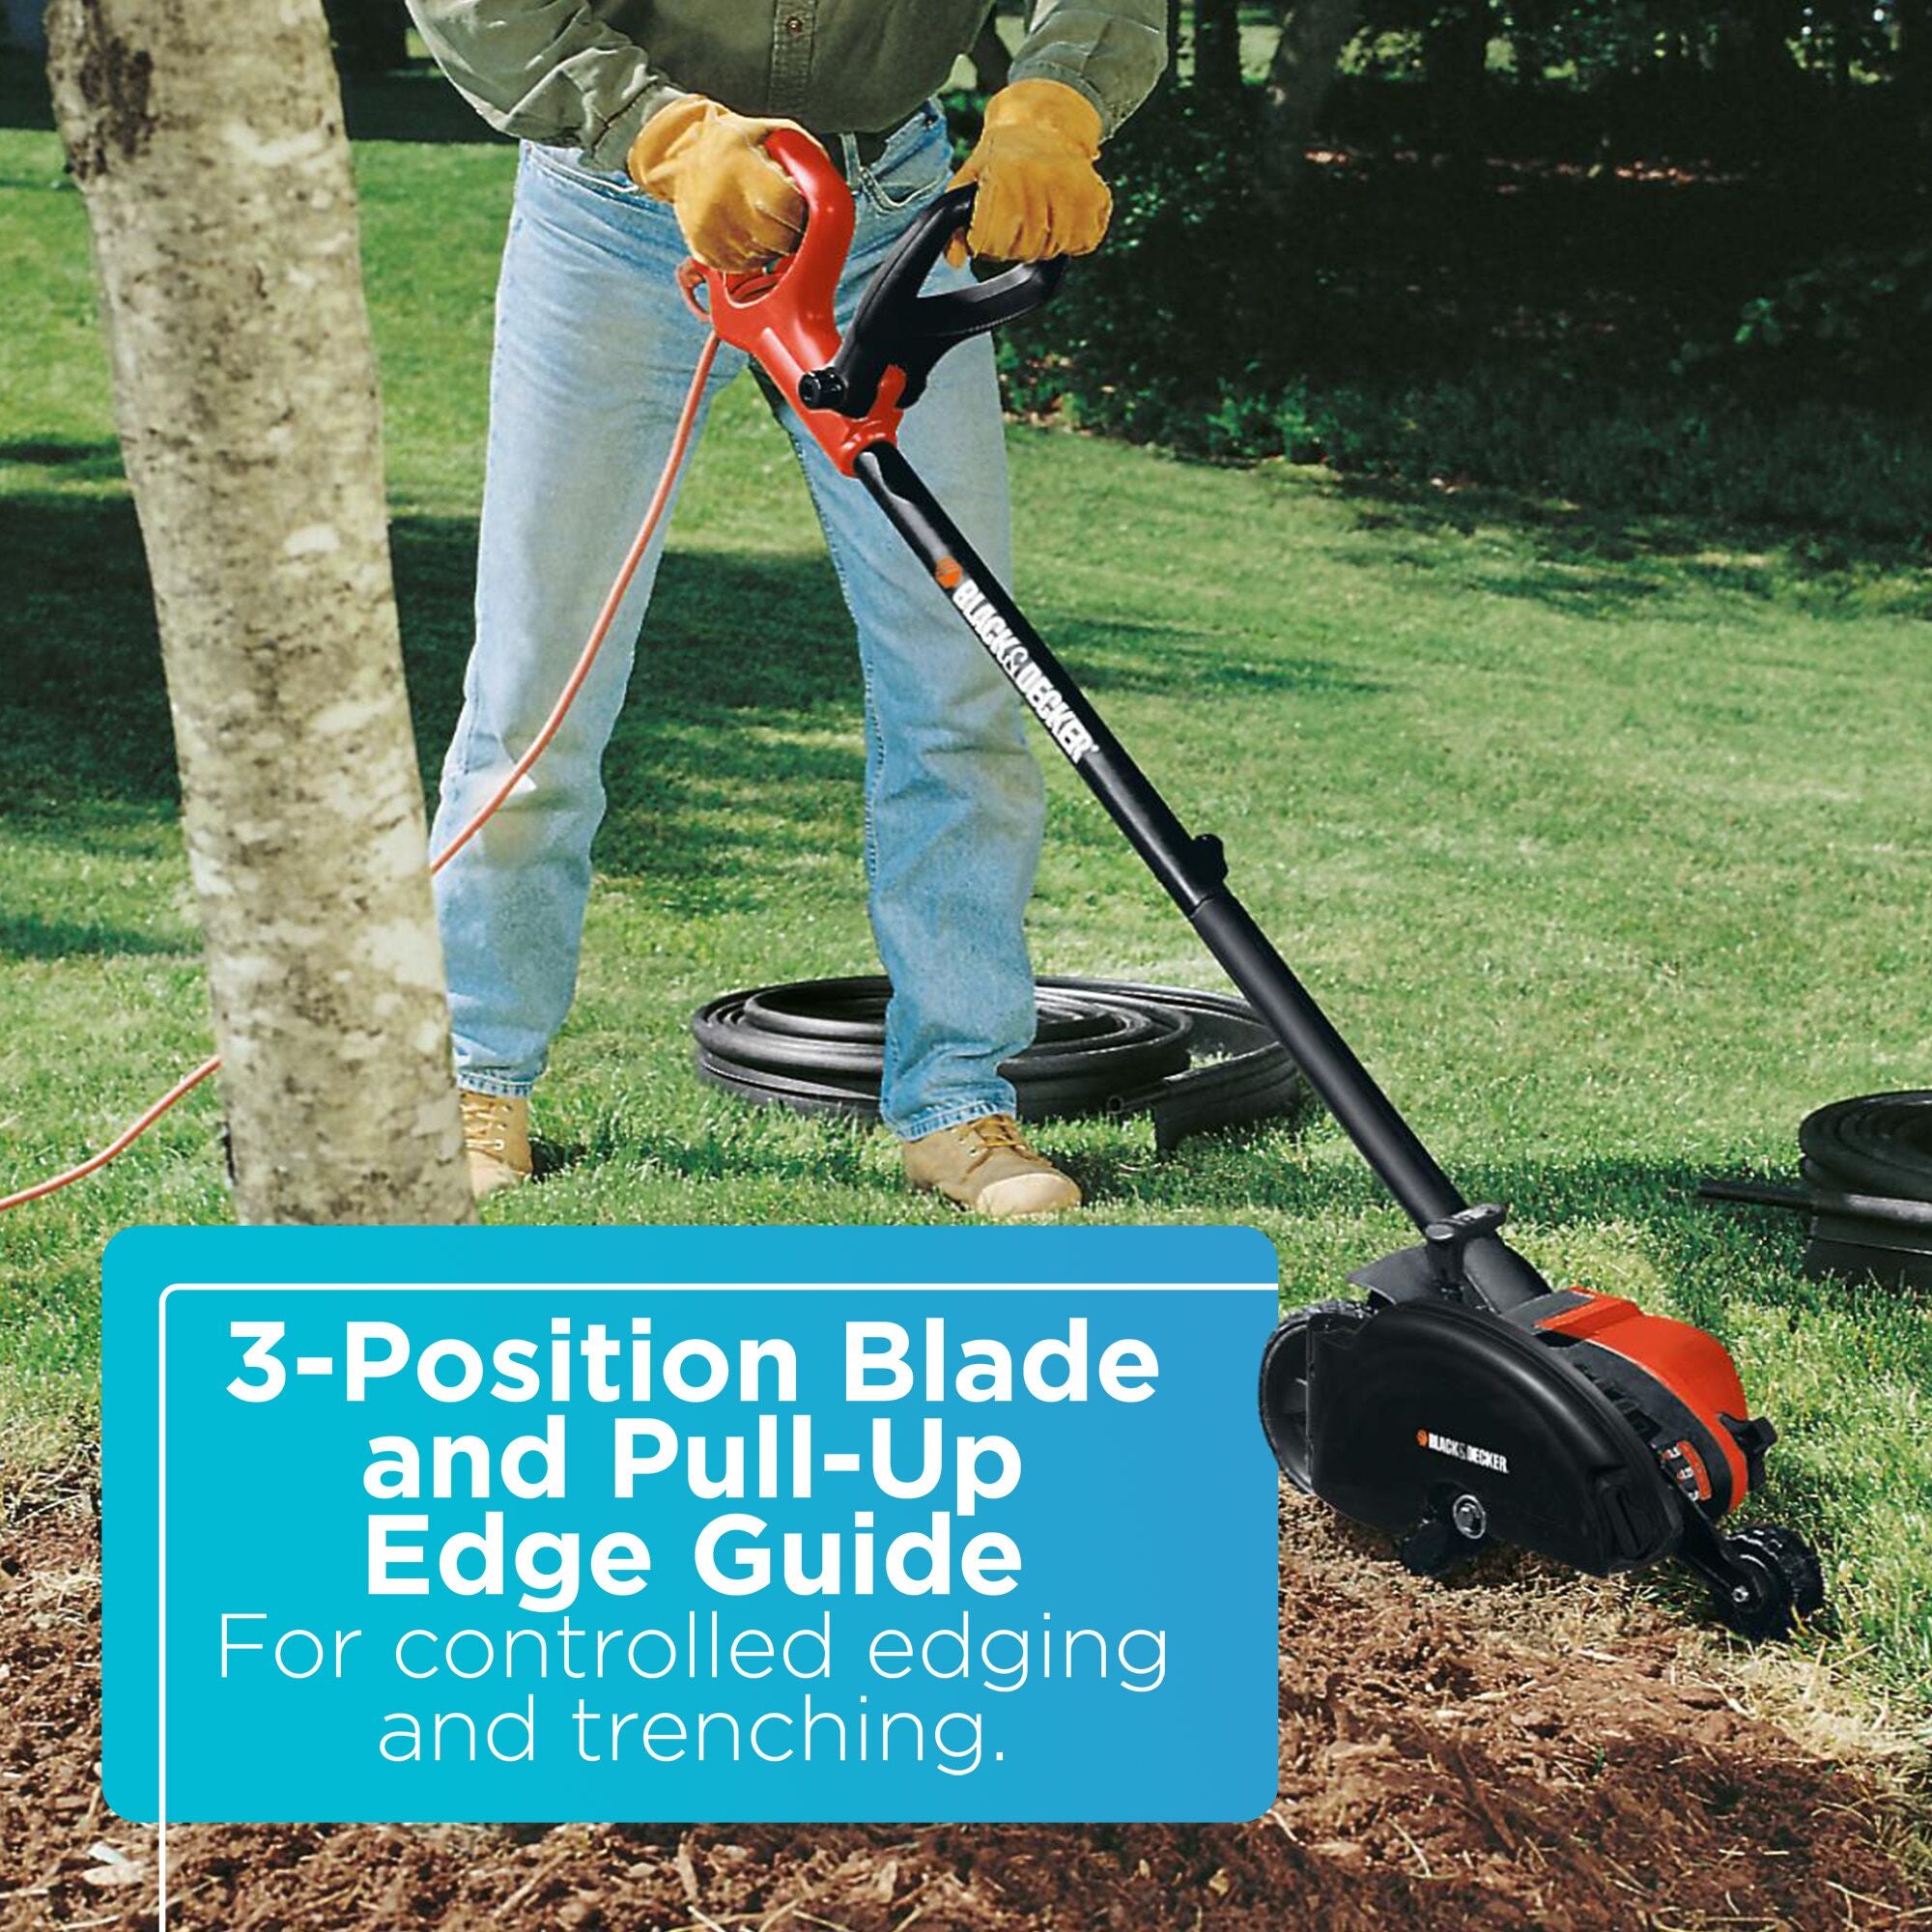 A person uses the BLACK+DECKER 7.5-in., 12 Amp Edger And Trencher. 3-position blade and pull-up edge guide for controlled edging and trenching.